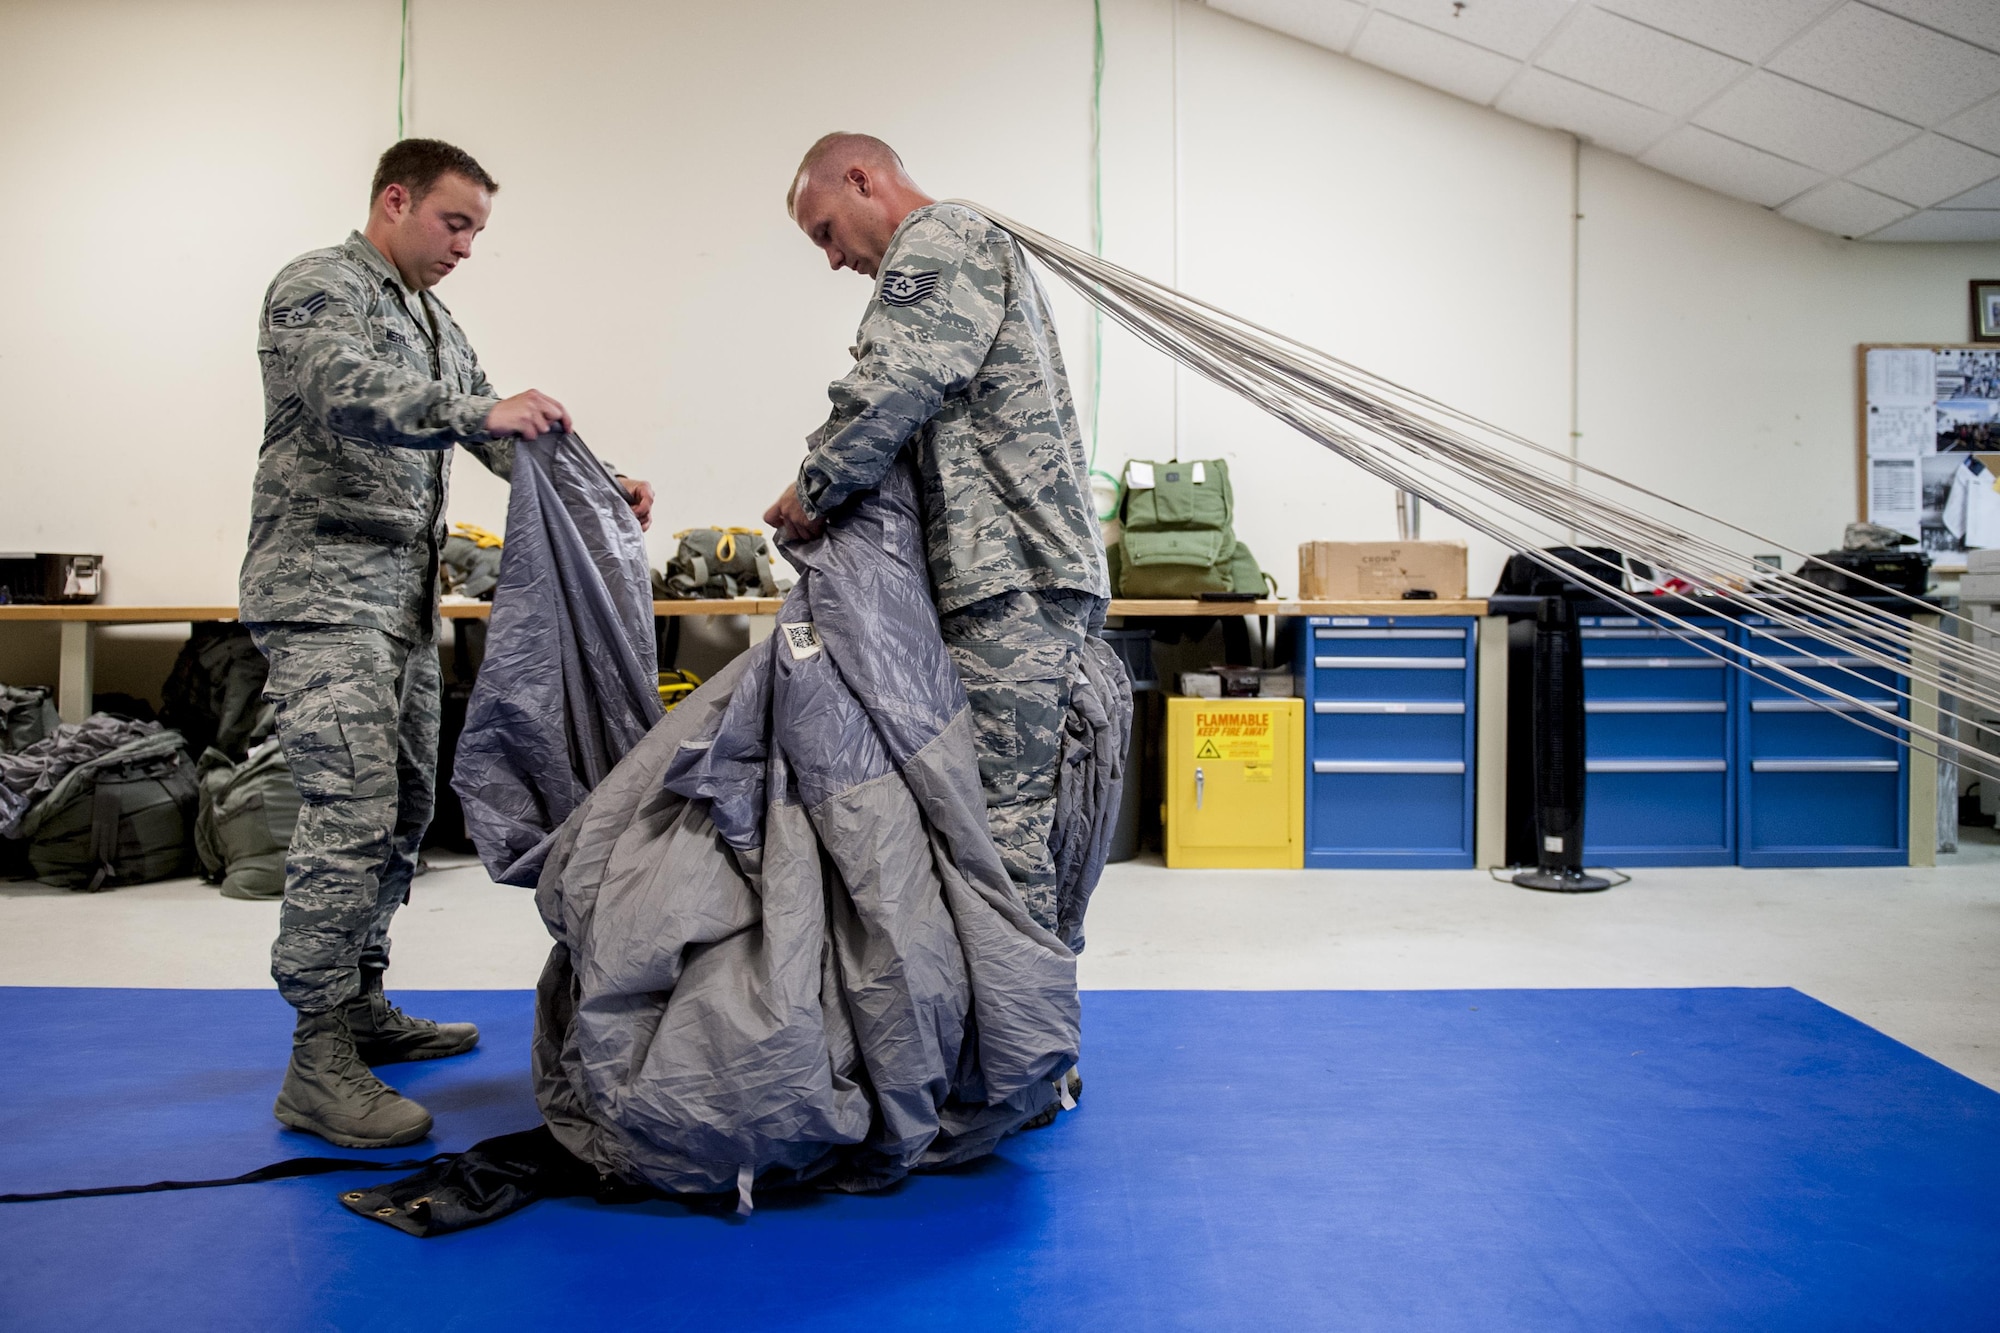 U.S. Air Force Senior Airman Erik Merrill, 31st Rescue Squadron aircrew flight equipment journeyman, and Tech. Sgt. Matthew Michels, 31st RQS aircrew flight equipment assistant NCO in charge, fold a parachute canopy June 20, 2016, at Kadena Air Base, Japan. Merrill and Michels ensure the safety of aircrews jumping from aircraft by assembling and maintaining parachute packs according to strict guidelines and procedures. (U.S. Air Force photo by Senior Airman Peter Reft)